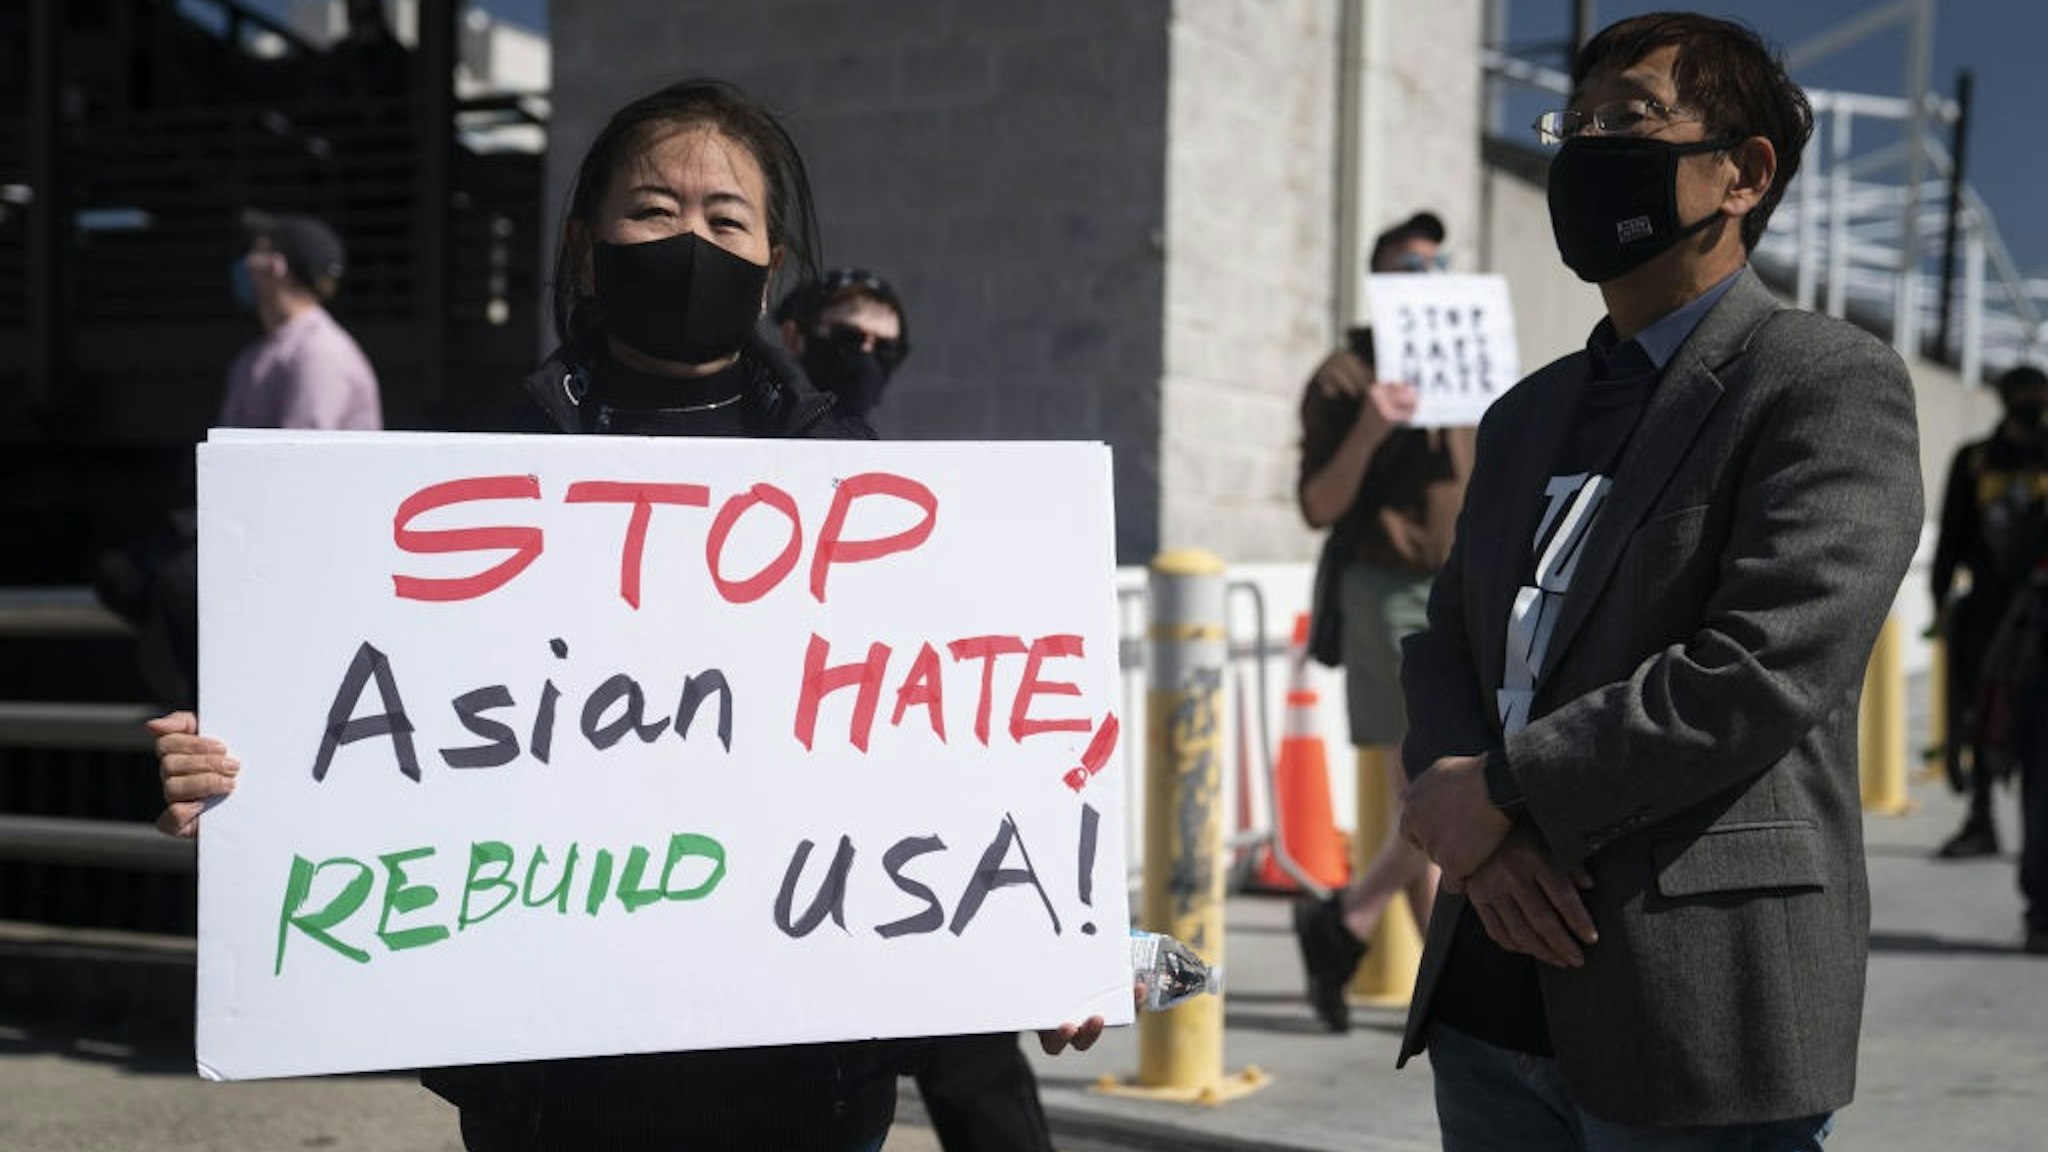 Demonstrators march to CNN Center following a Stop AAPI Hate Rally in Atlanta, Georgia, U.S., on Saturday, March 20, 2021.